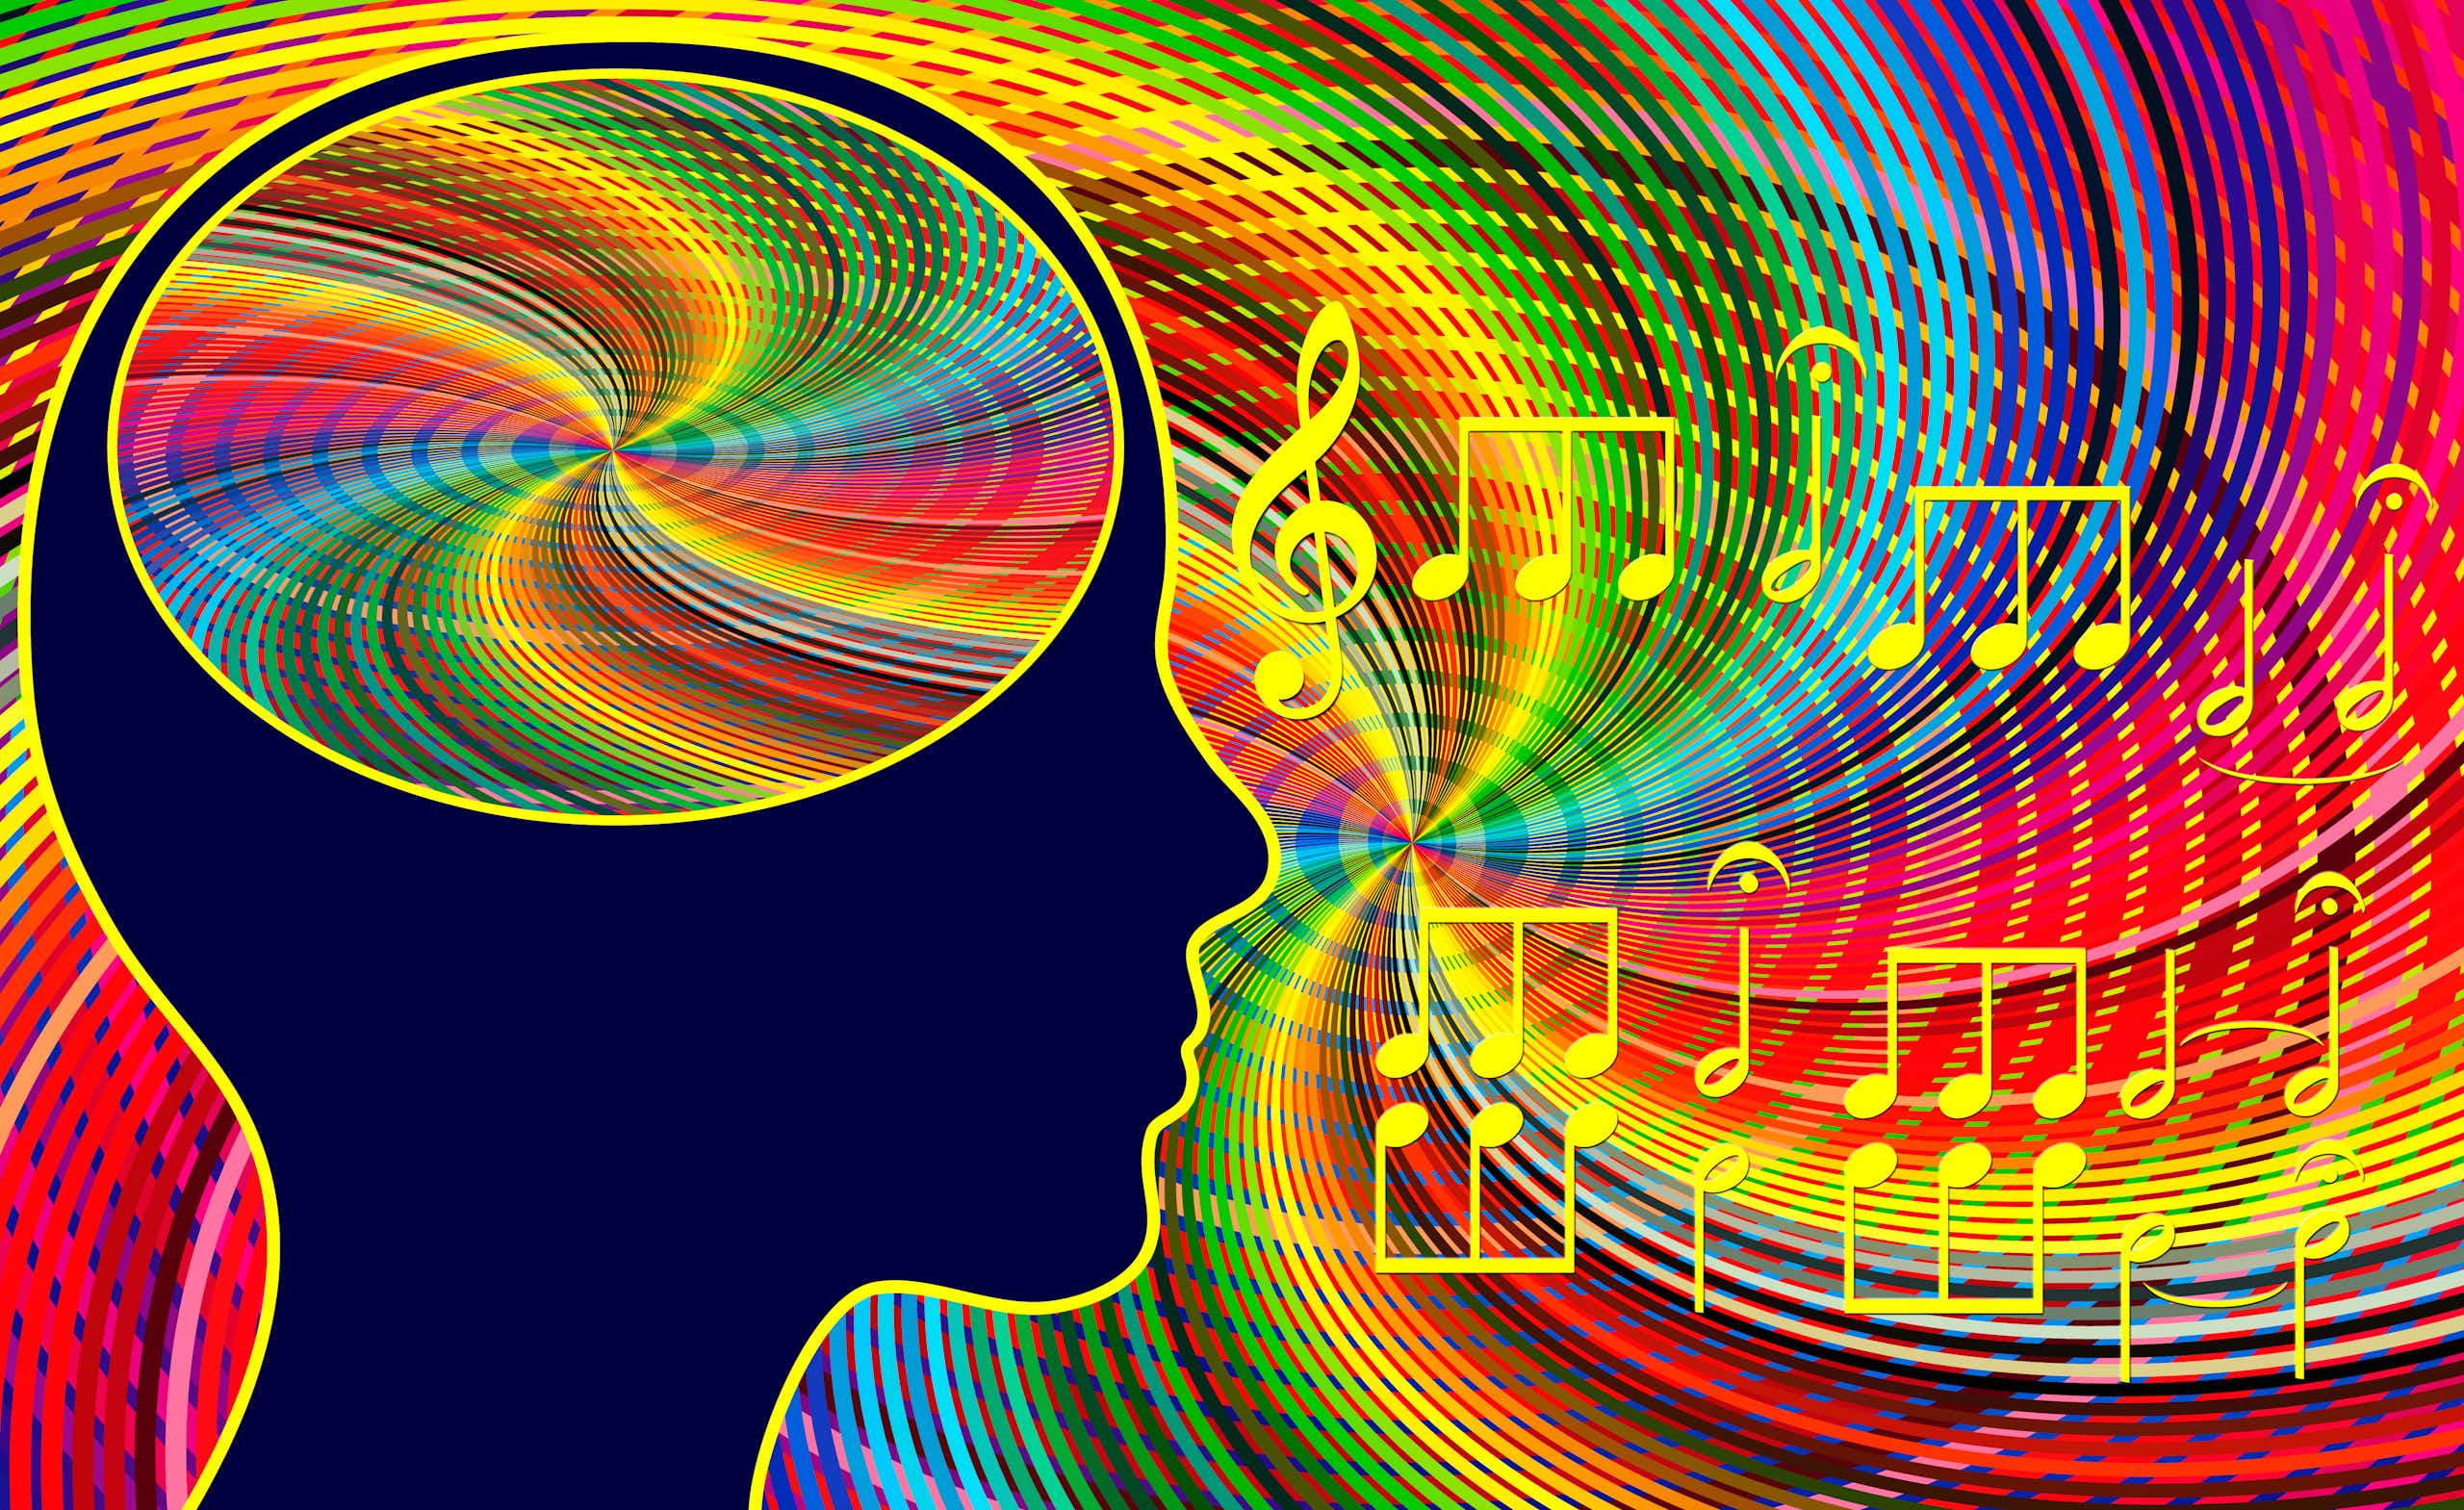 Illustration of a person's brain when listening to musical notes.